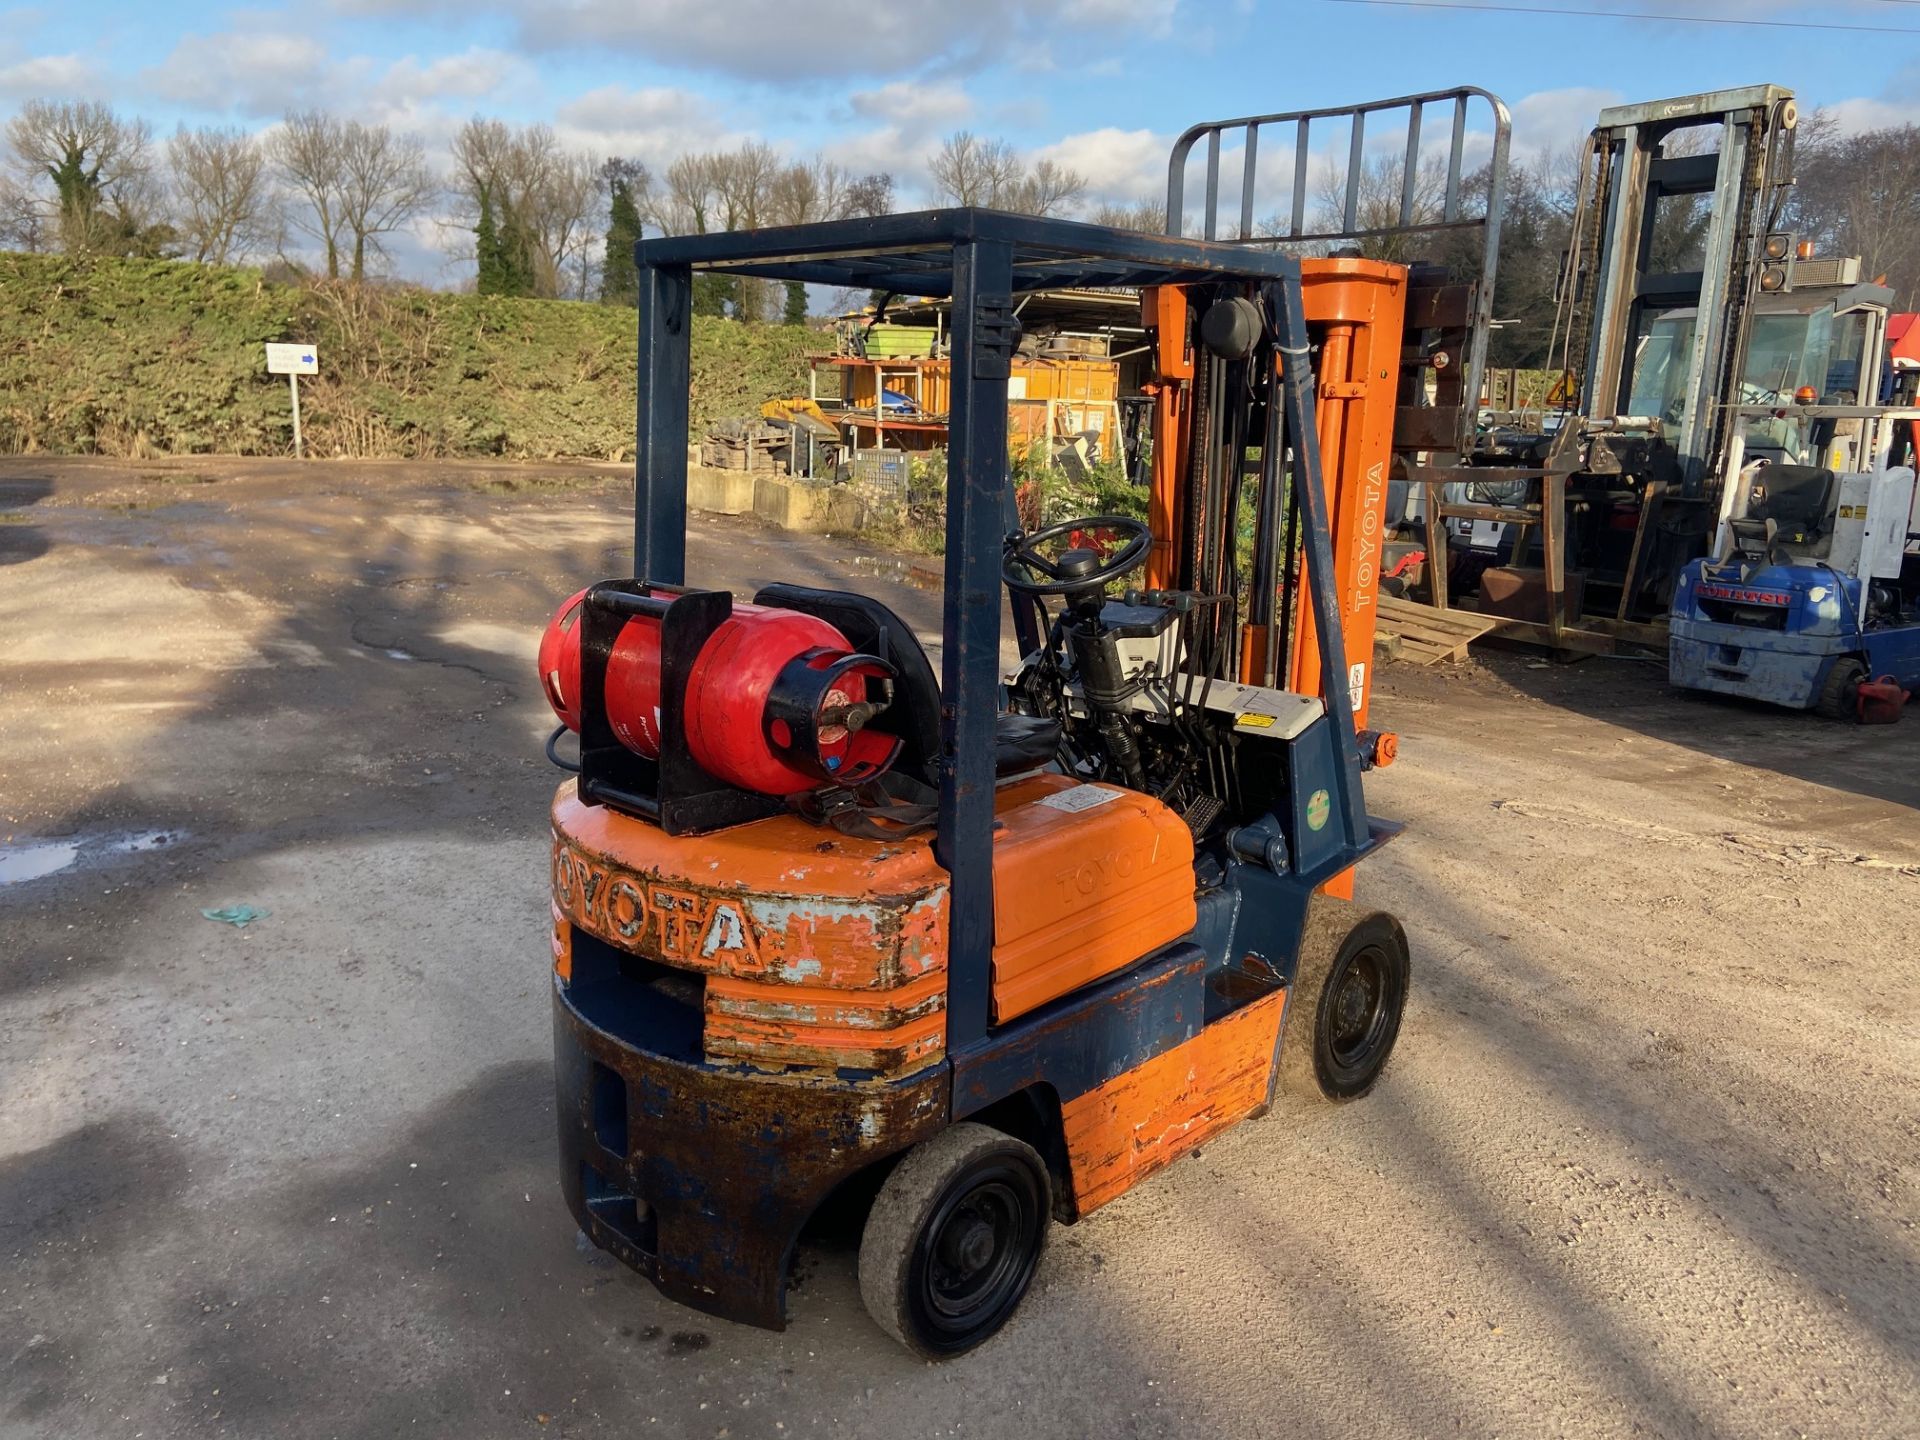 TOYOTA 1.5 TON GAS FORKLIFT, ALL OPERATIONAL, SIDE SHIFT, TIDY LITTLE TRUCK, GAS BOTTLE NOT INCLUDED - Image 3 of 5